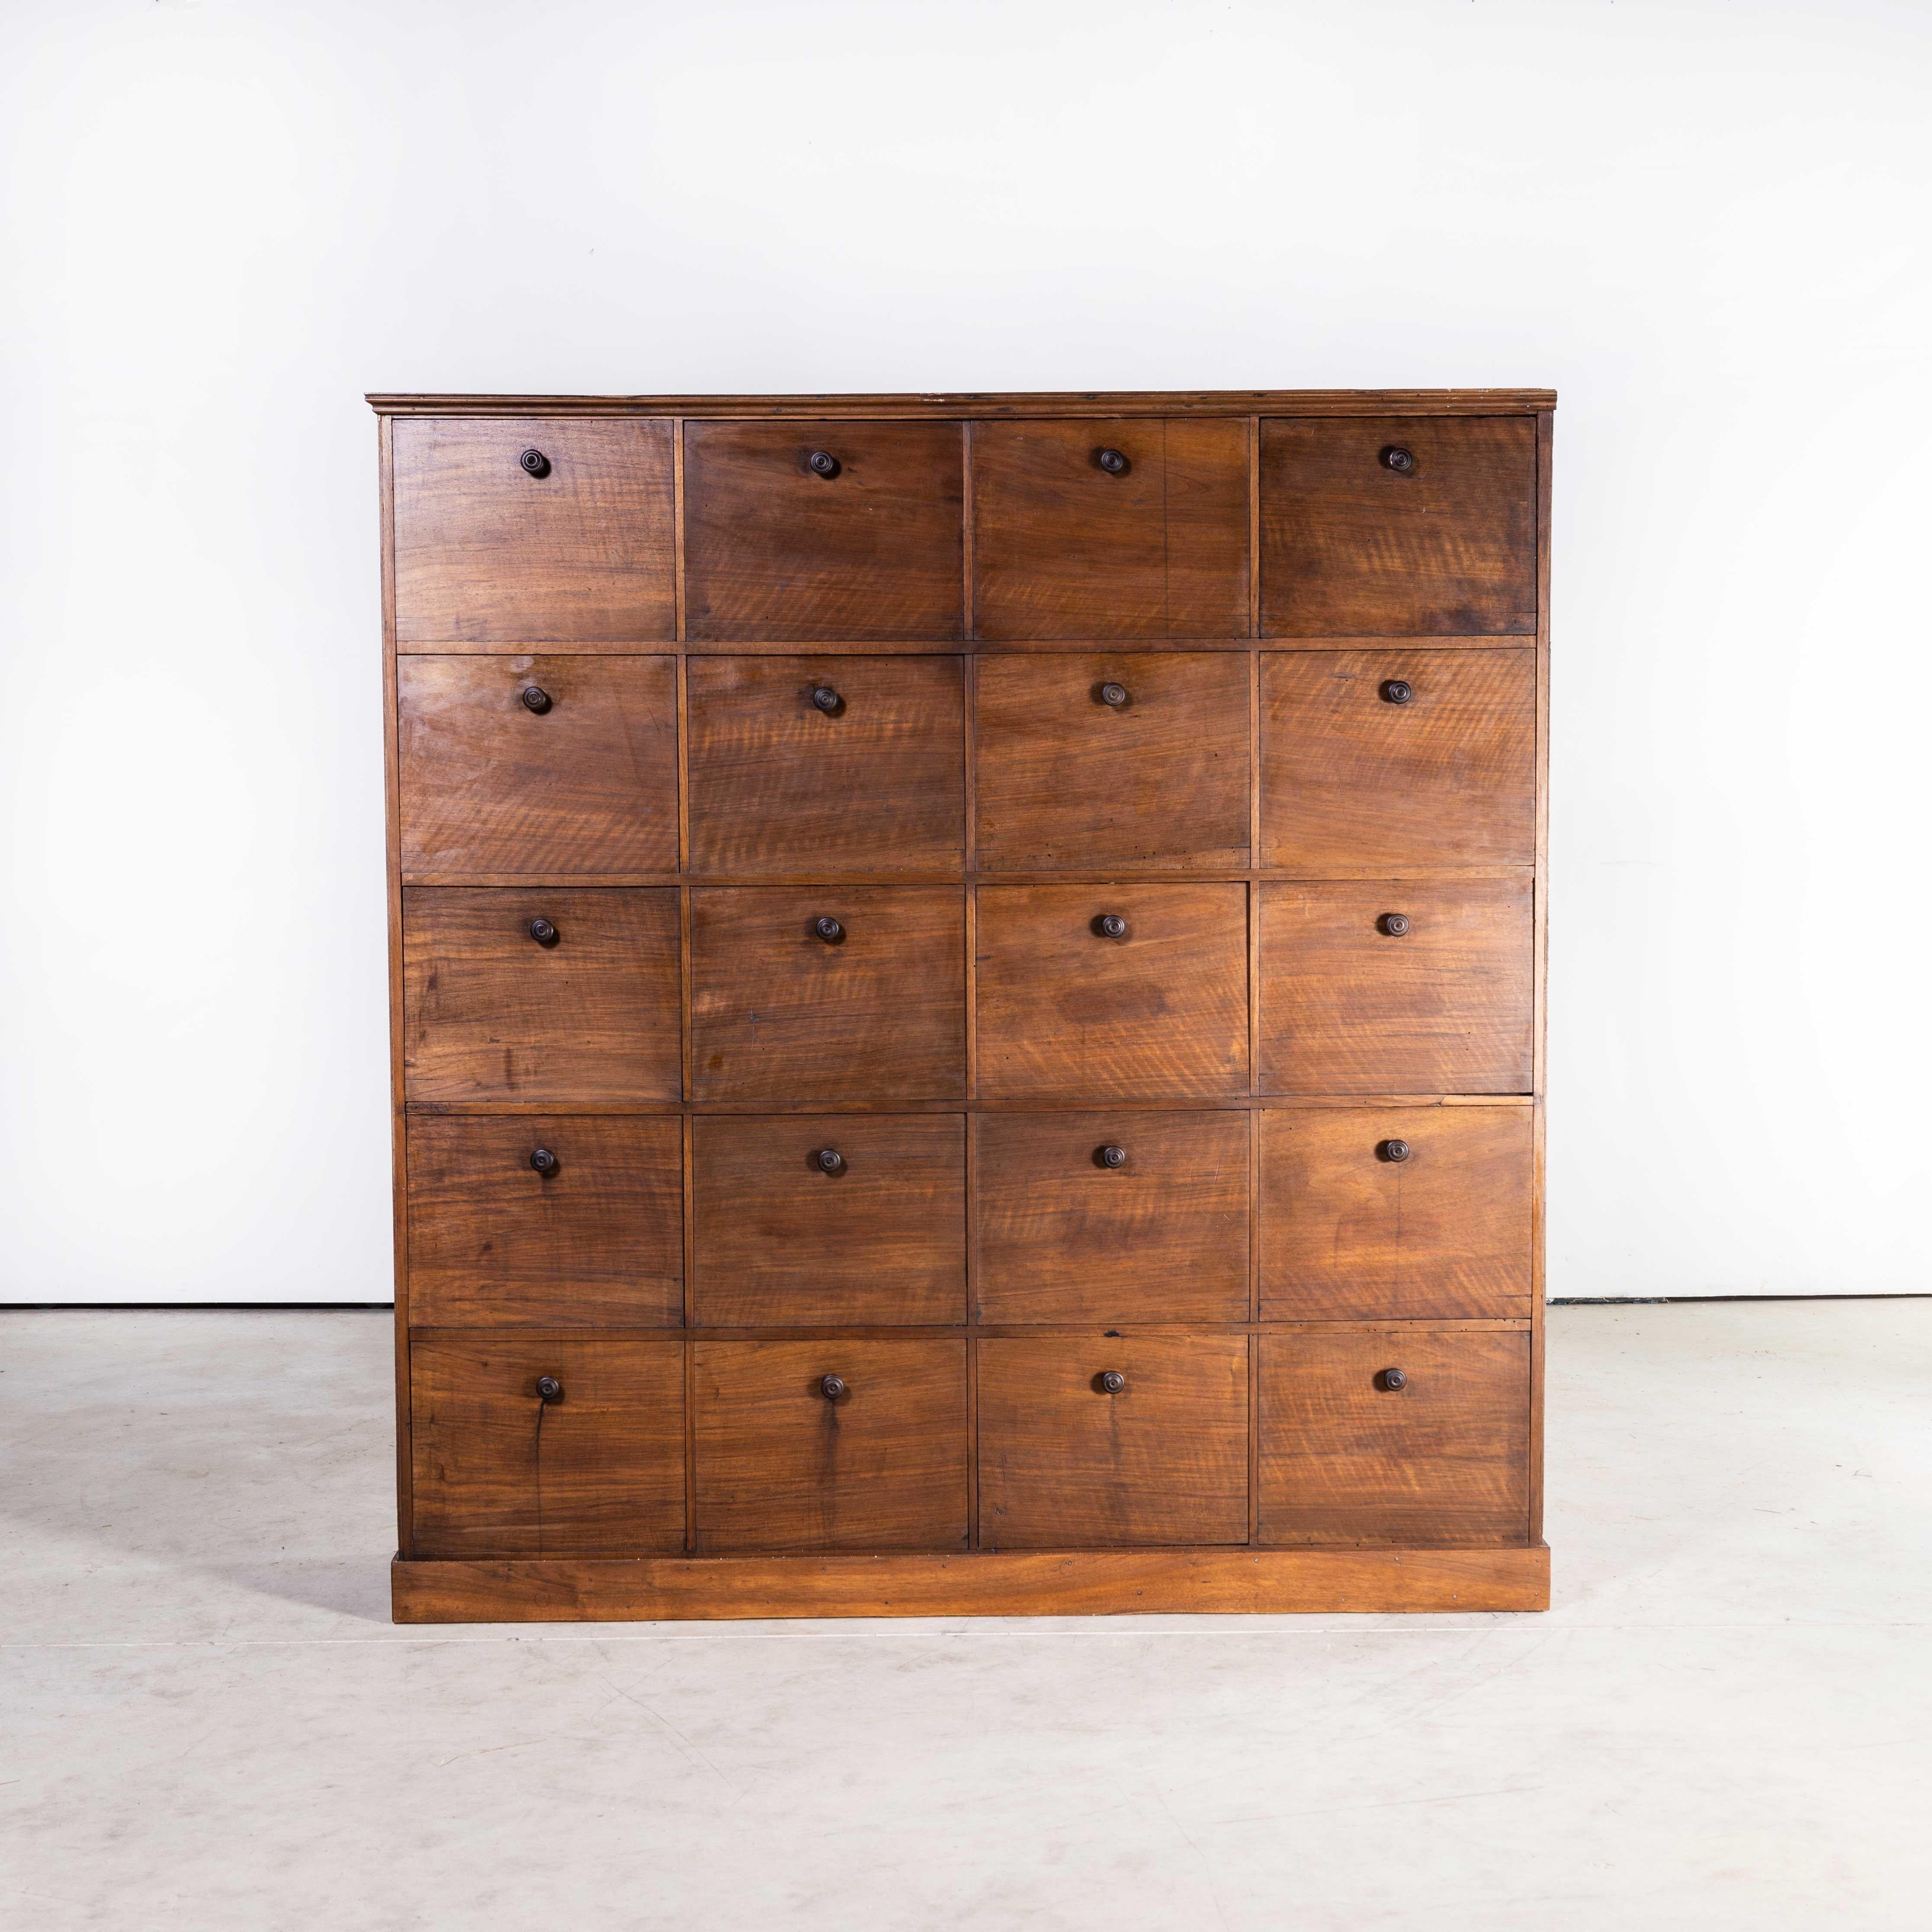 1940’s Advocat atelier klappet cabinet – twenty klappets.
1940’s Advocat atelier klappet cabinet. Sourced in the North of France this is a typical atelier klappet unusually made in wood, typically used in legal offices for practical filing. The